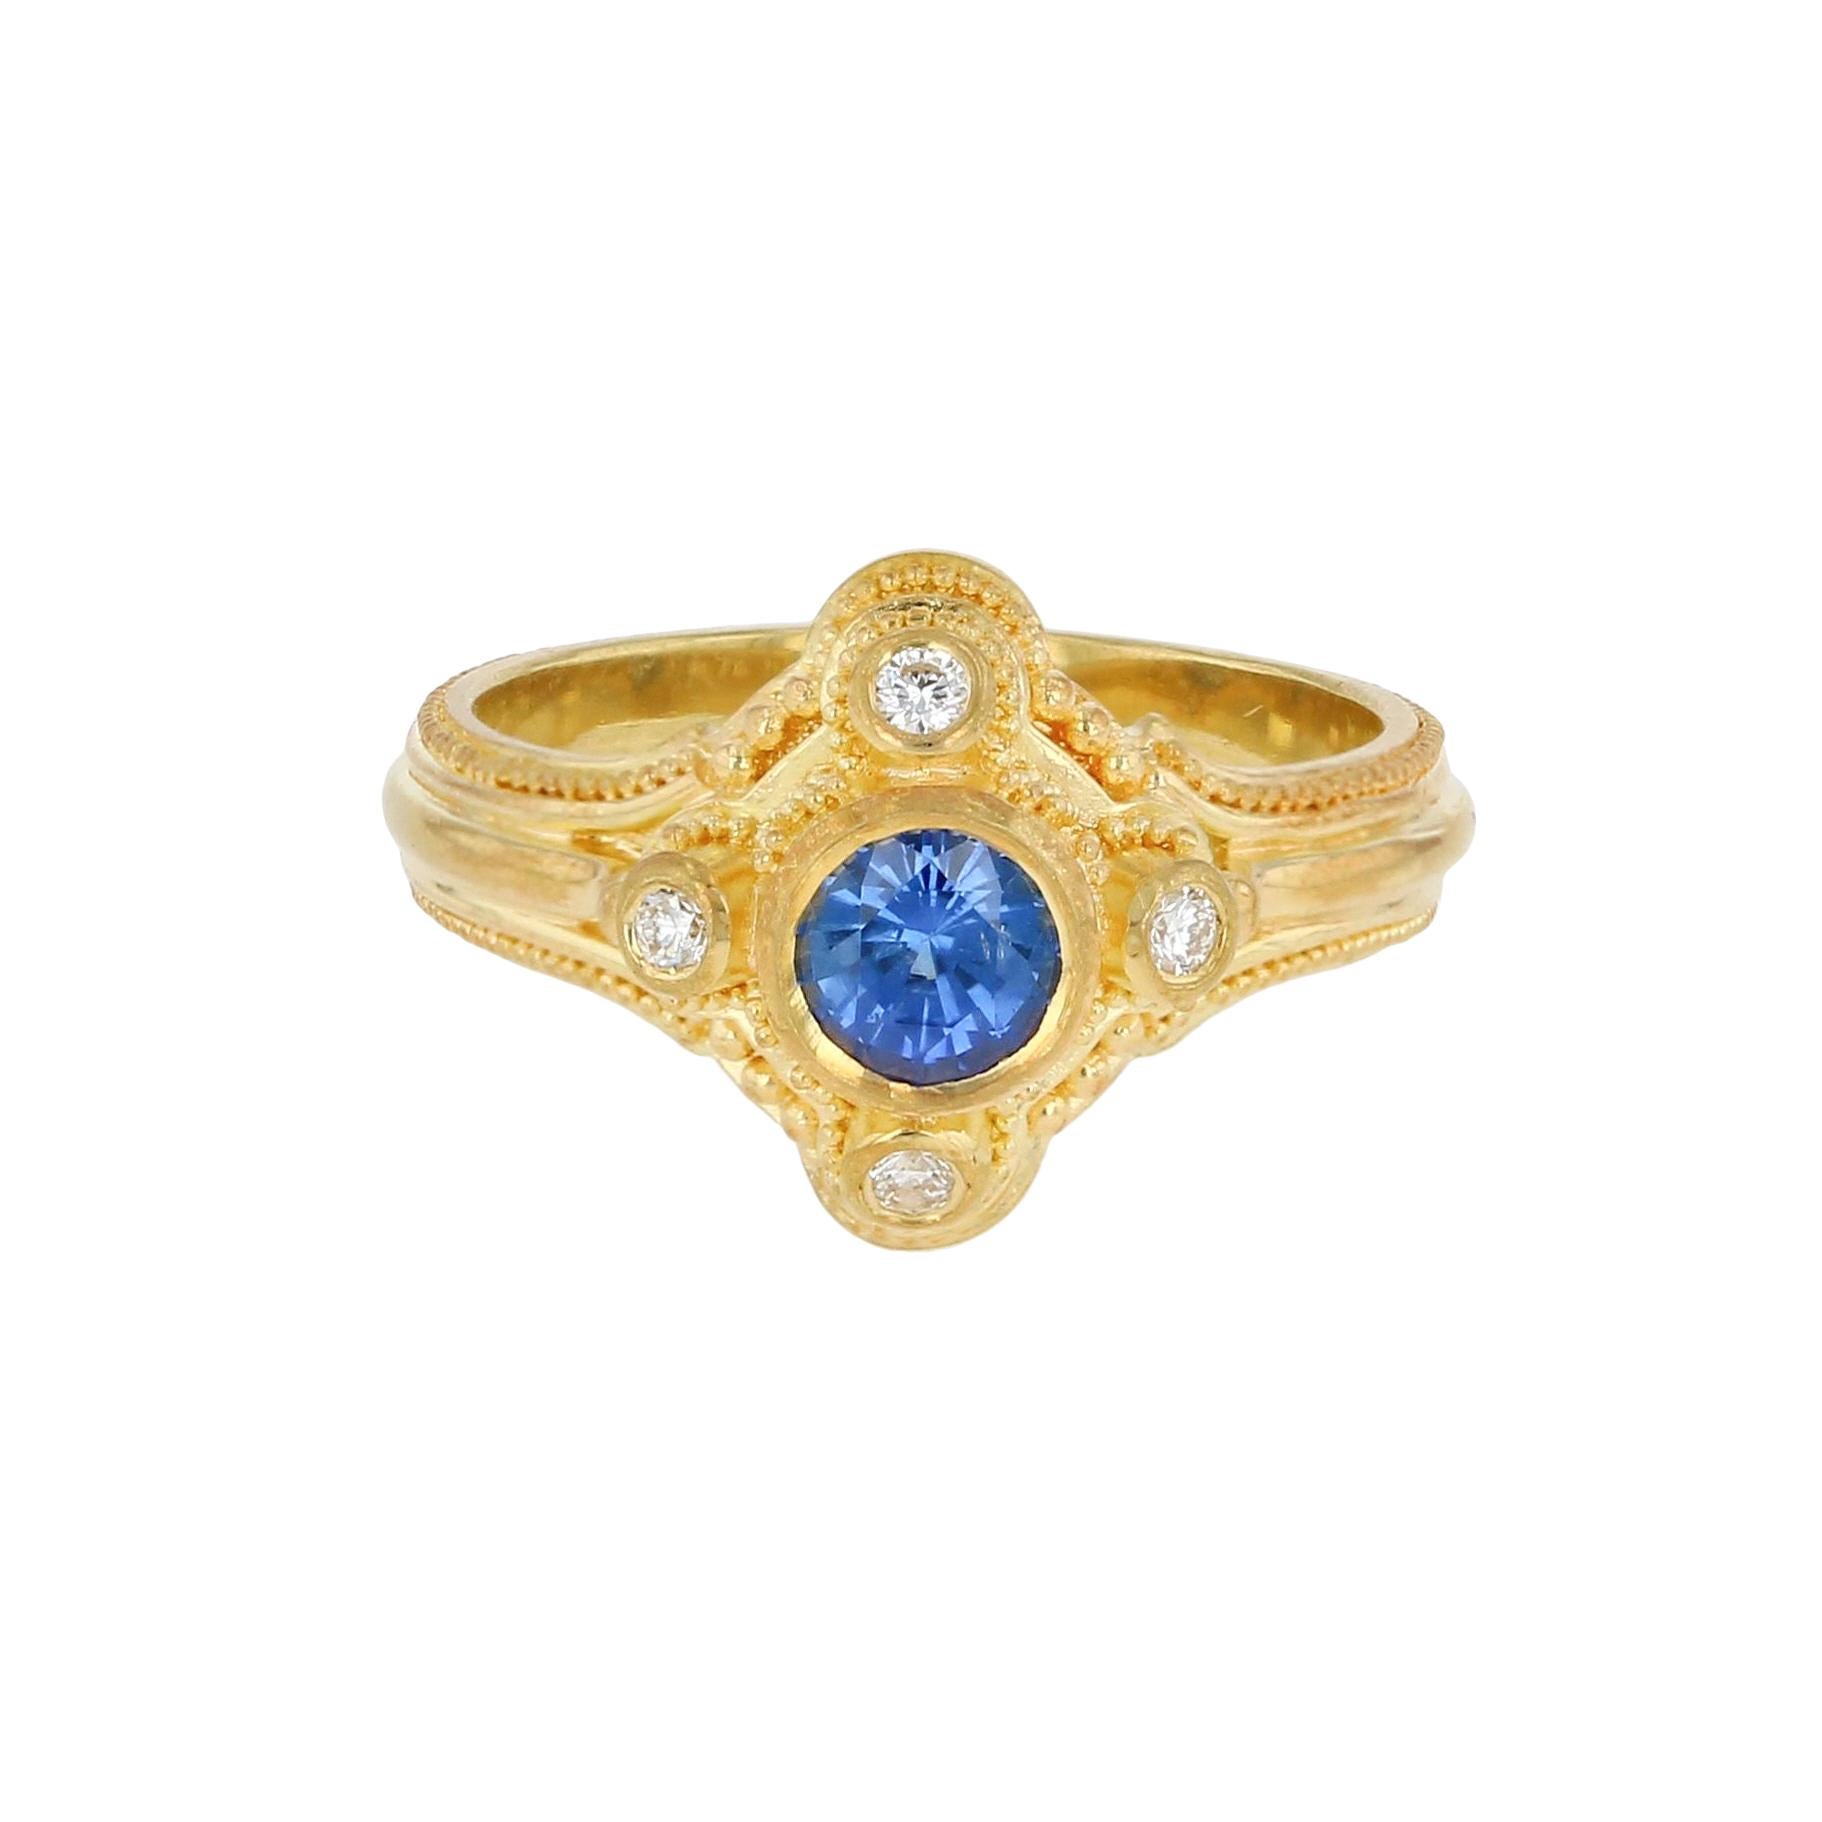 Round Cut Kent Raible 18 Karat Gold Blue Sapphire and Diamond Ring with Fine Granulation For Sale